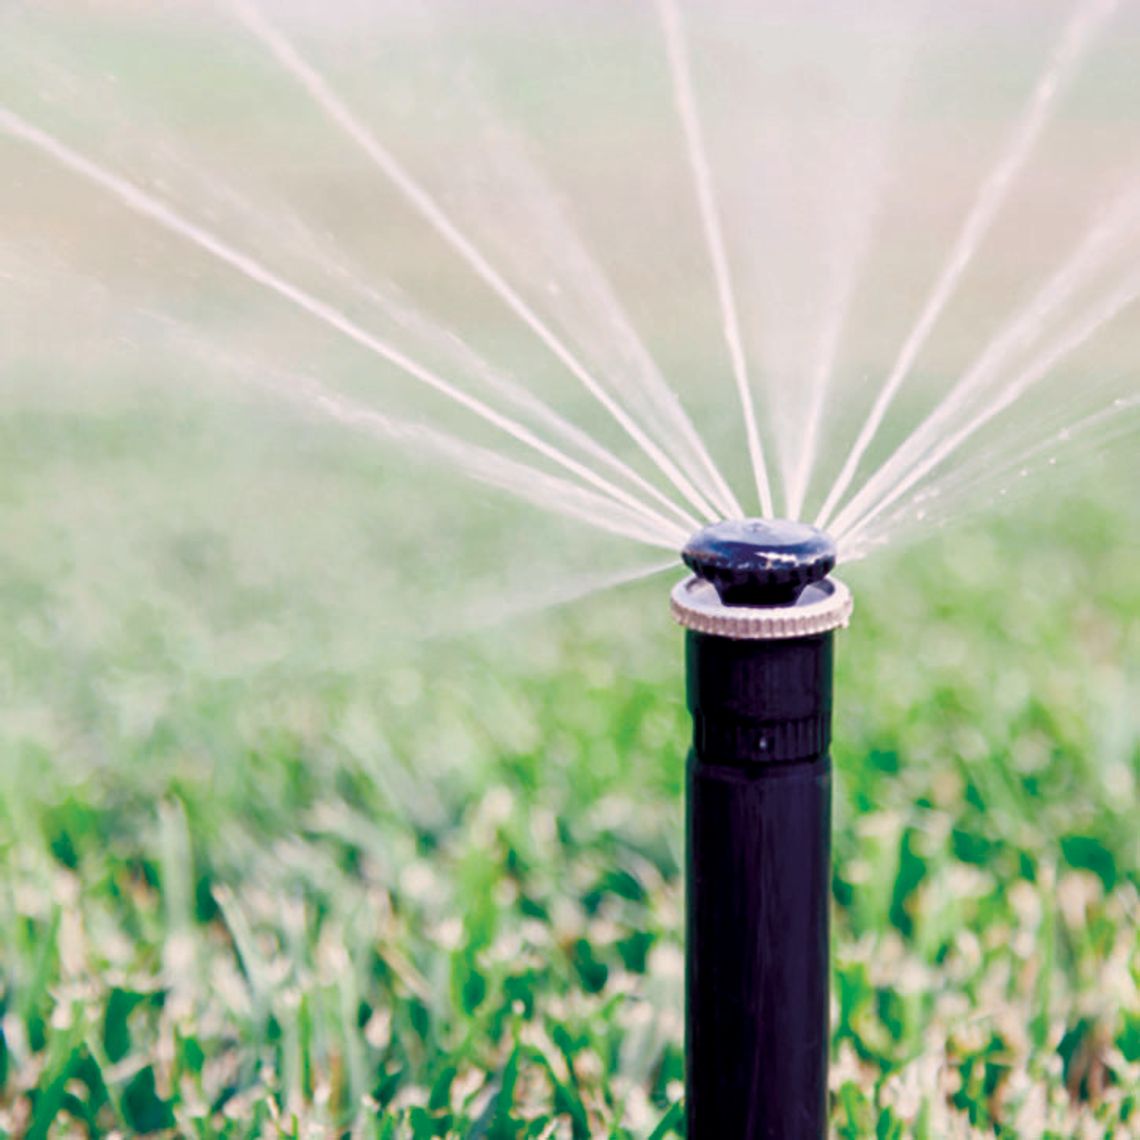 City rolls out water conservation rebate programs